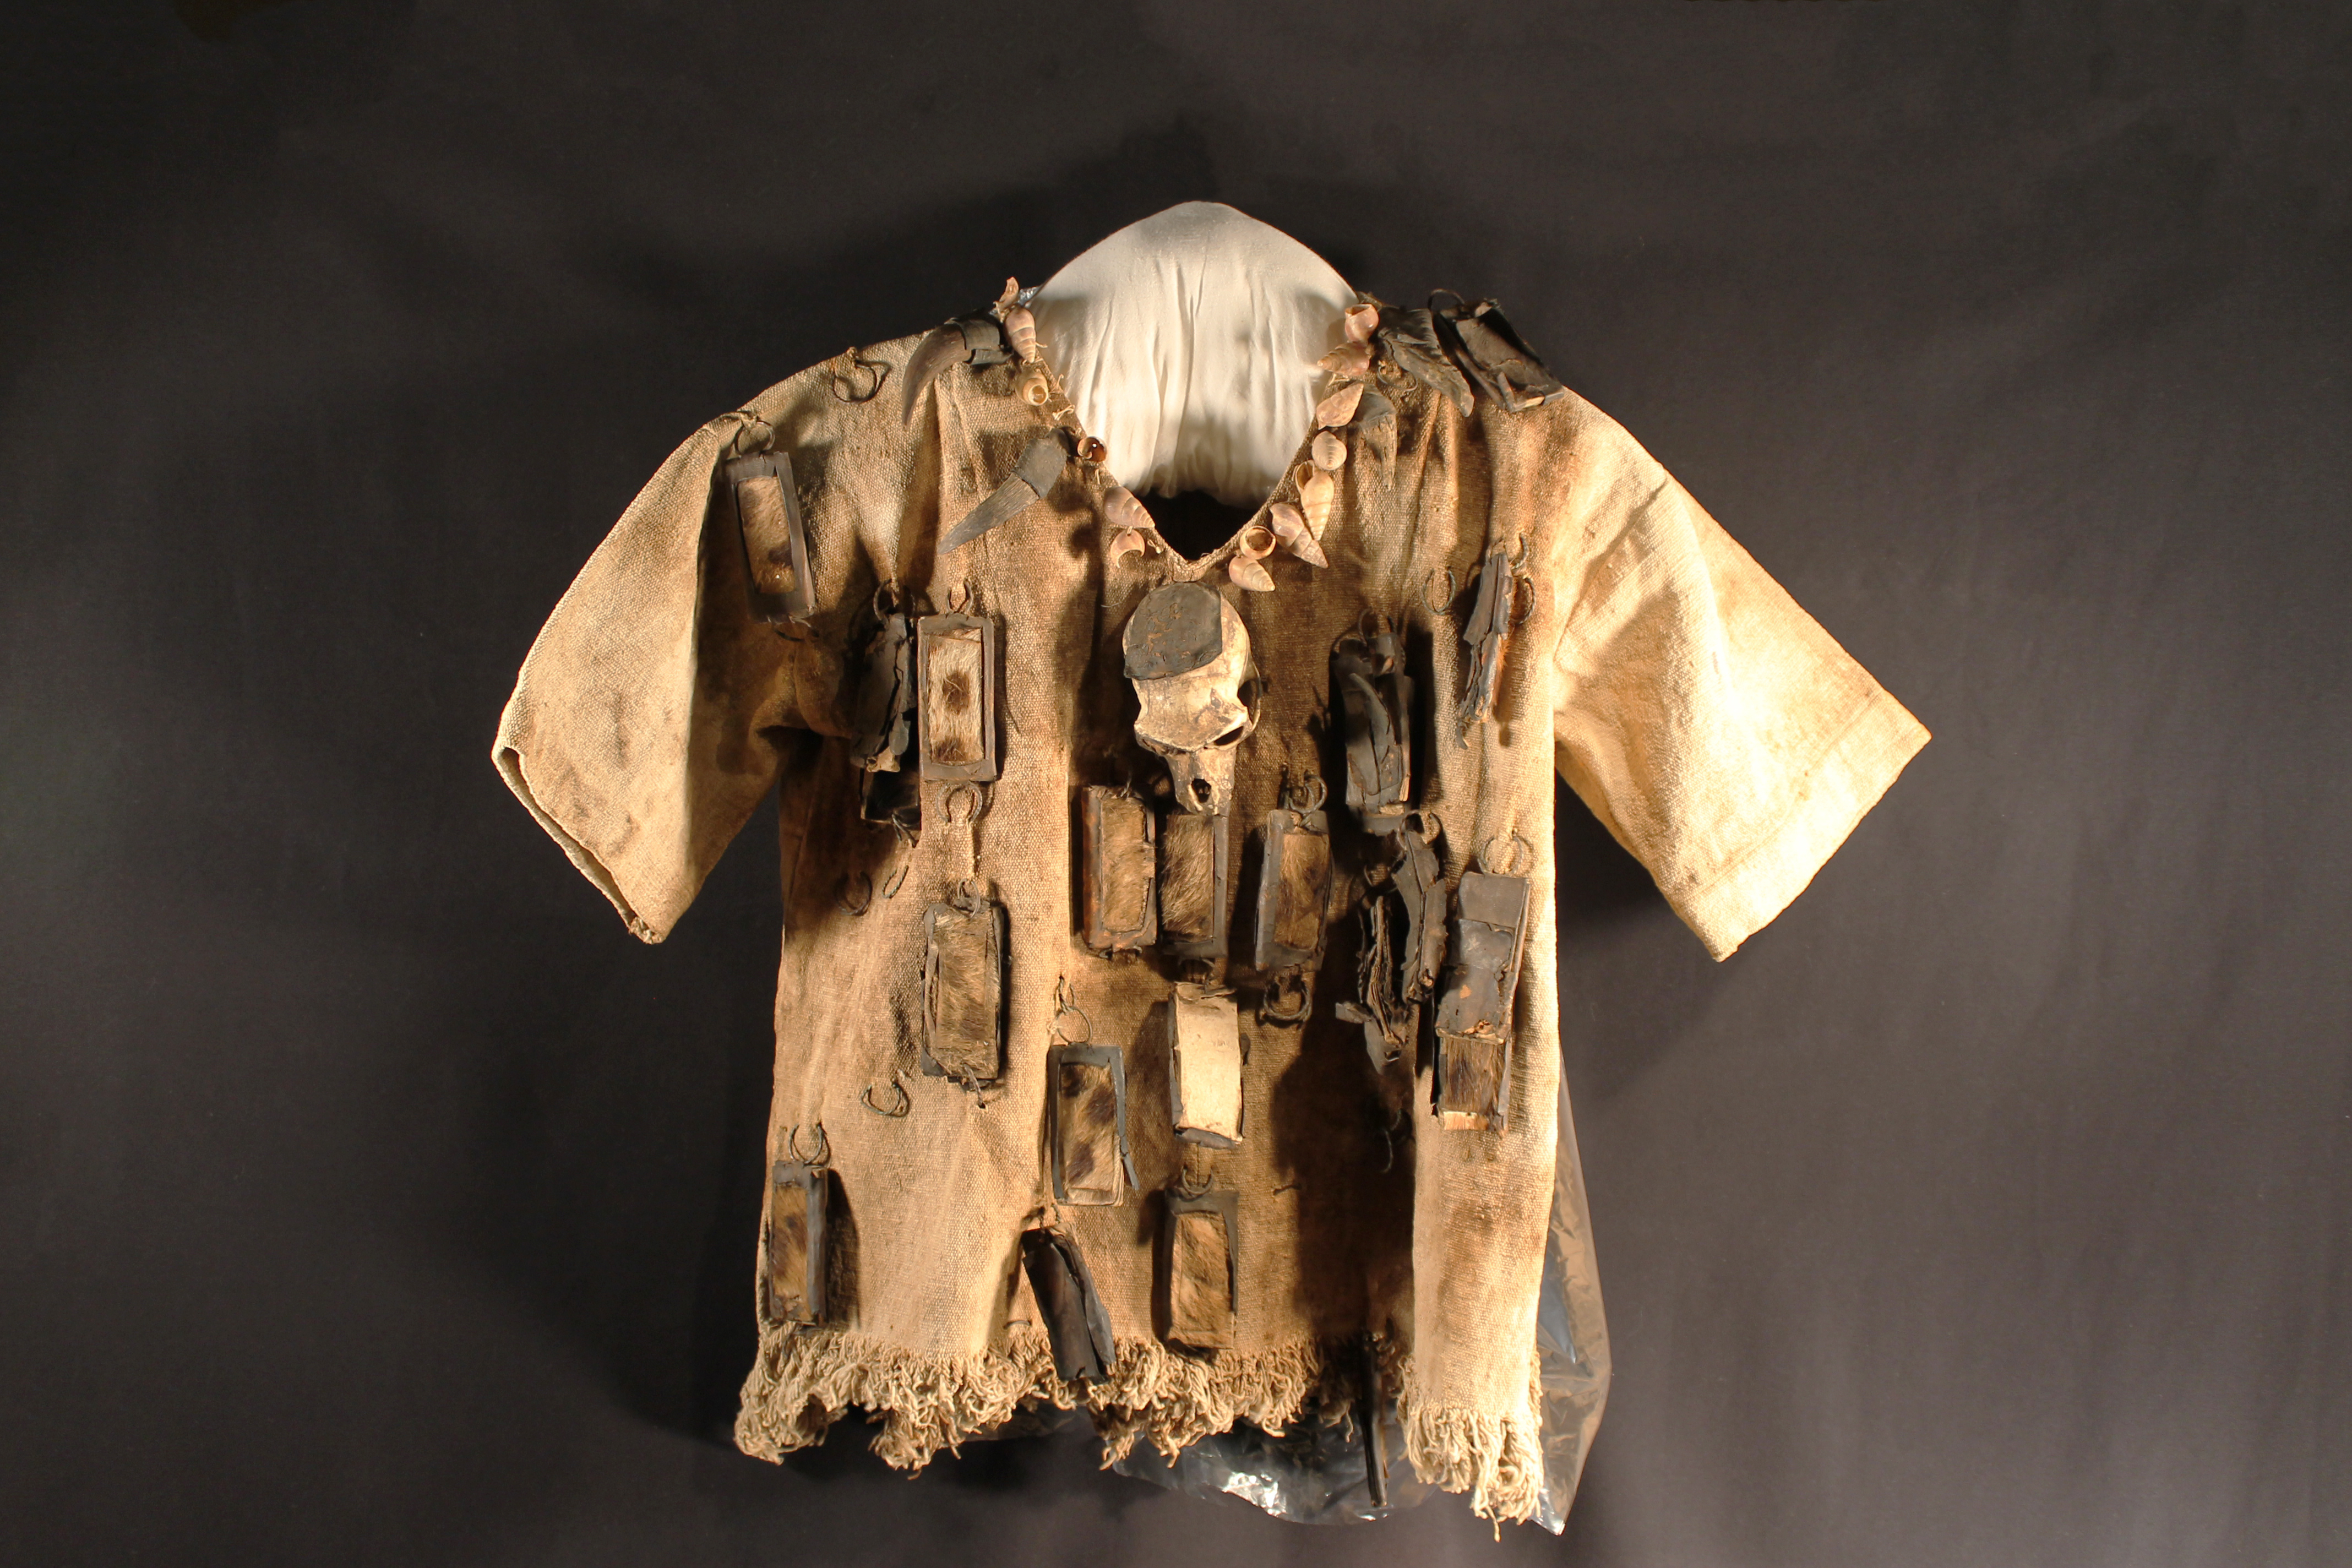 Cotton pullover short sleeved shirt with fringed bottom. Marine snail shells line the V-neck, a monkey skull in the middle, leather/hide pockets dangling off the shirt and shirt has been very well used consisting of sweat stains and dirt